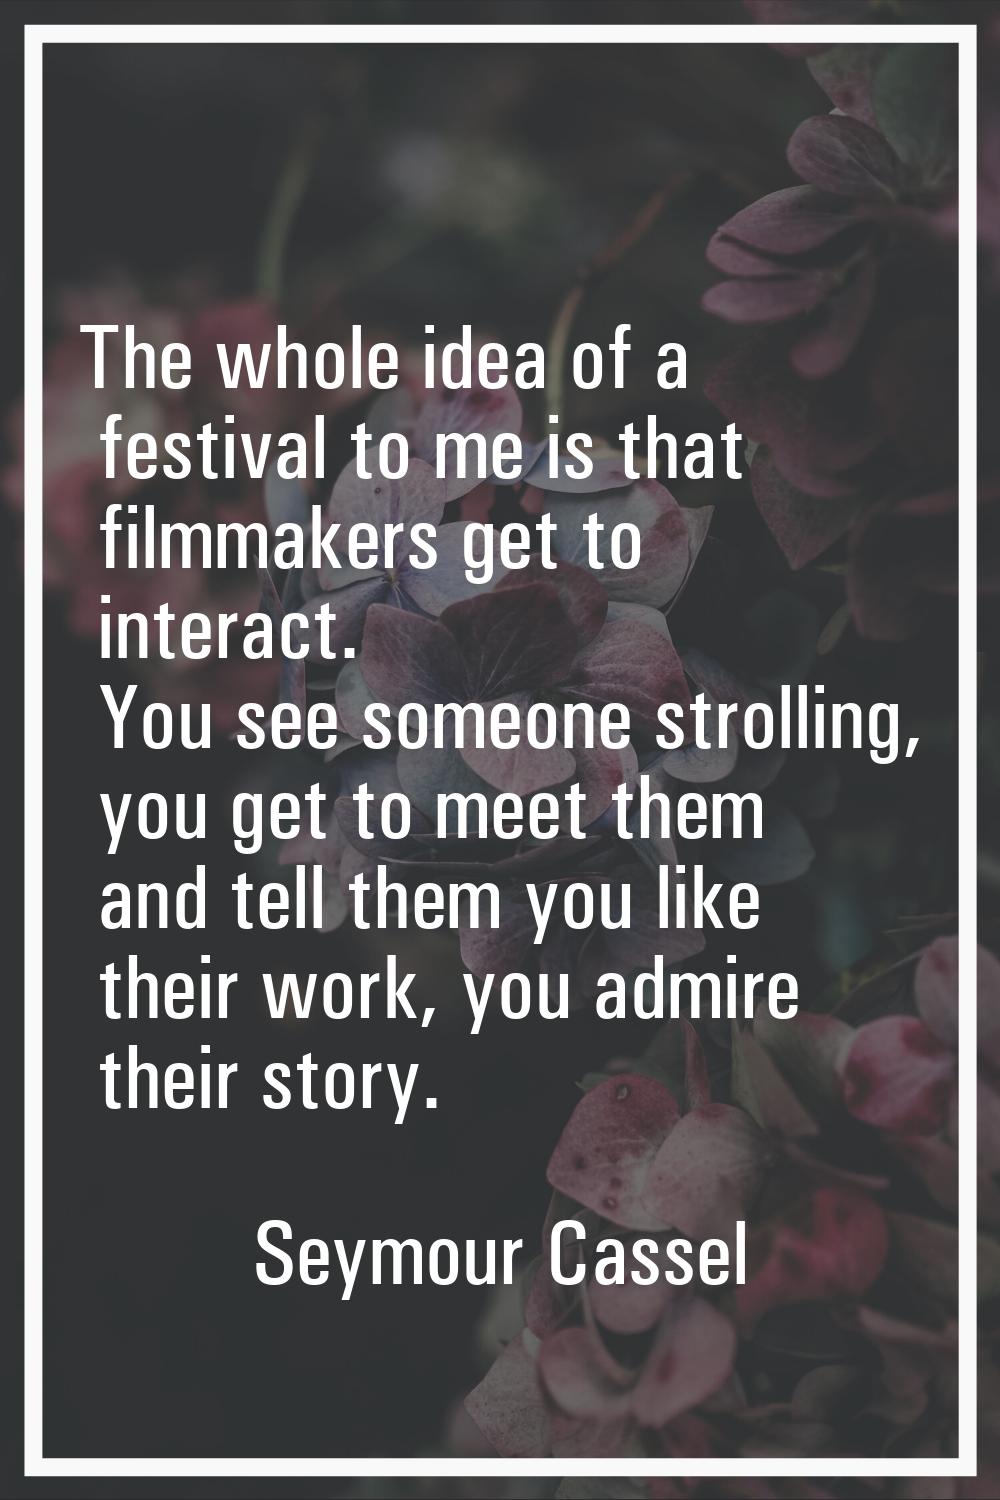 The whole idea of a festival to me is that filmmakers get to interact. You see someone strolling, y